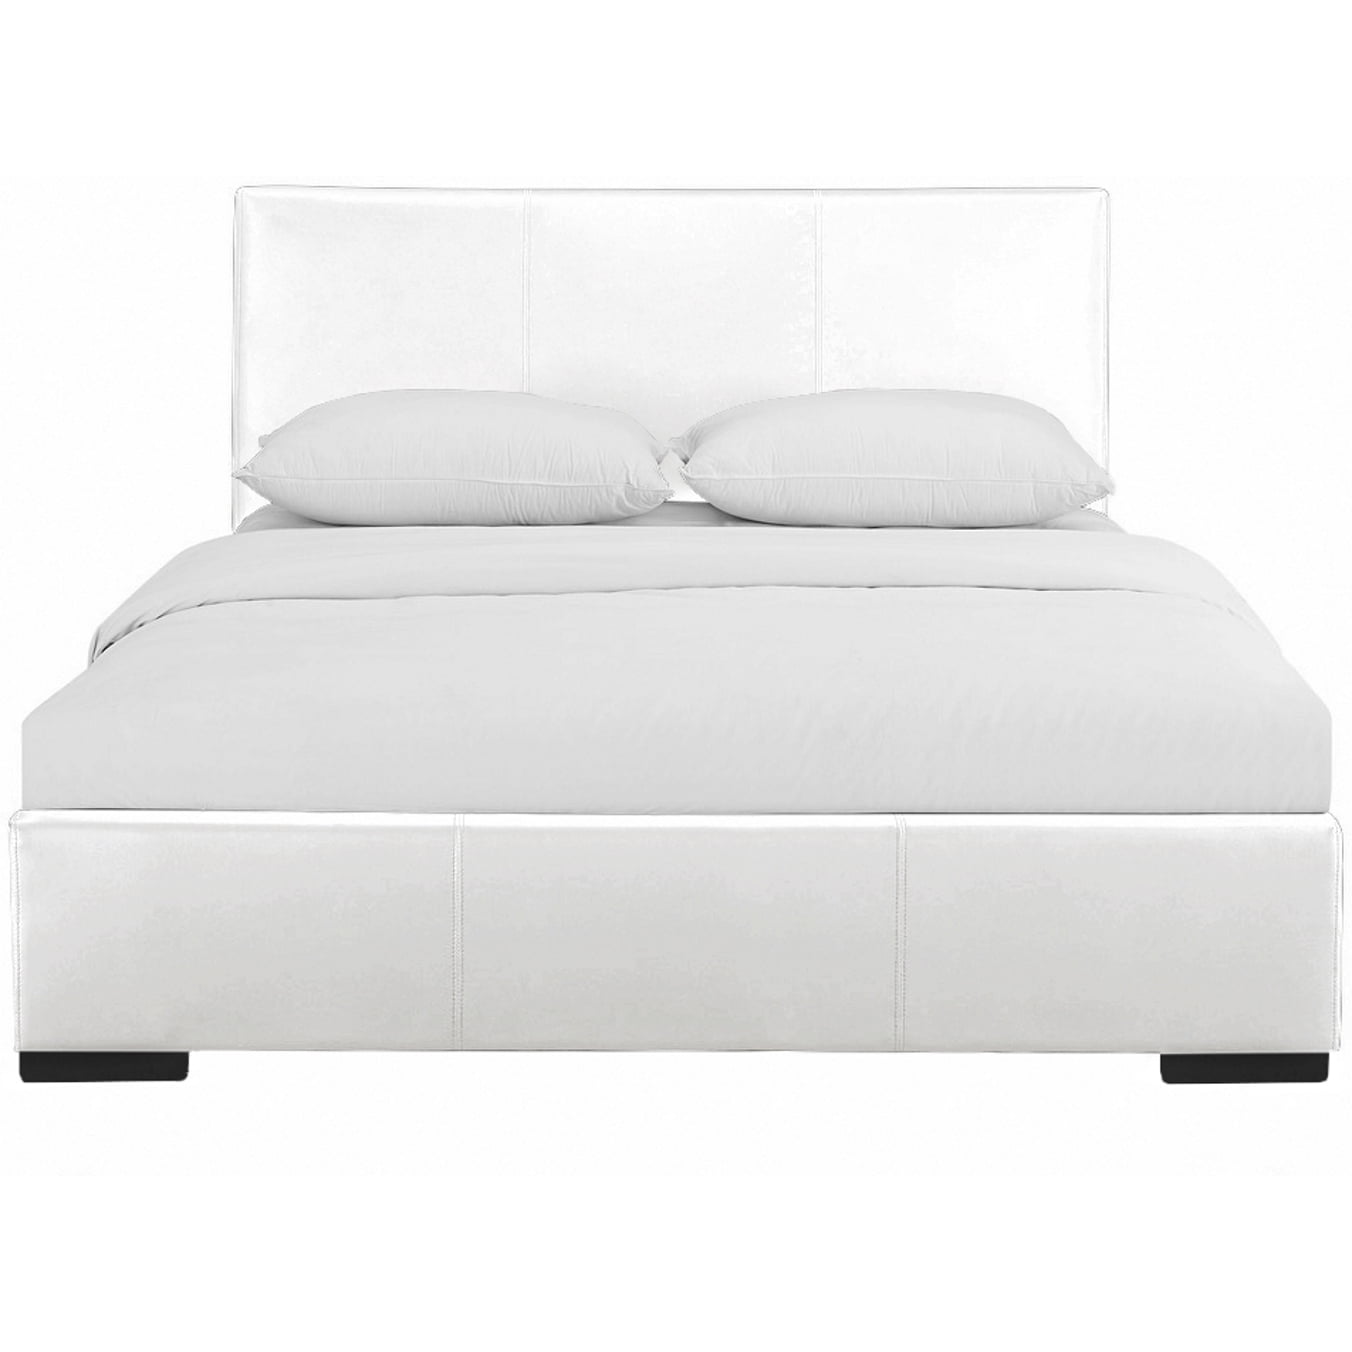 86344 In. Indes Upholstered Platform Bed, White, Queen Size - 85.4 X 63.4 X 34.8 In.